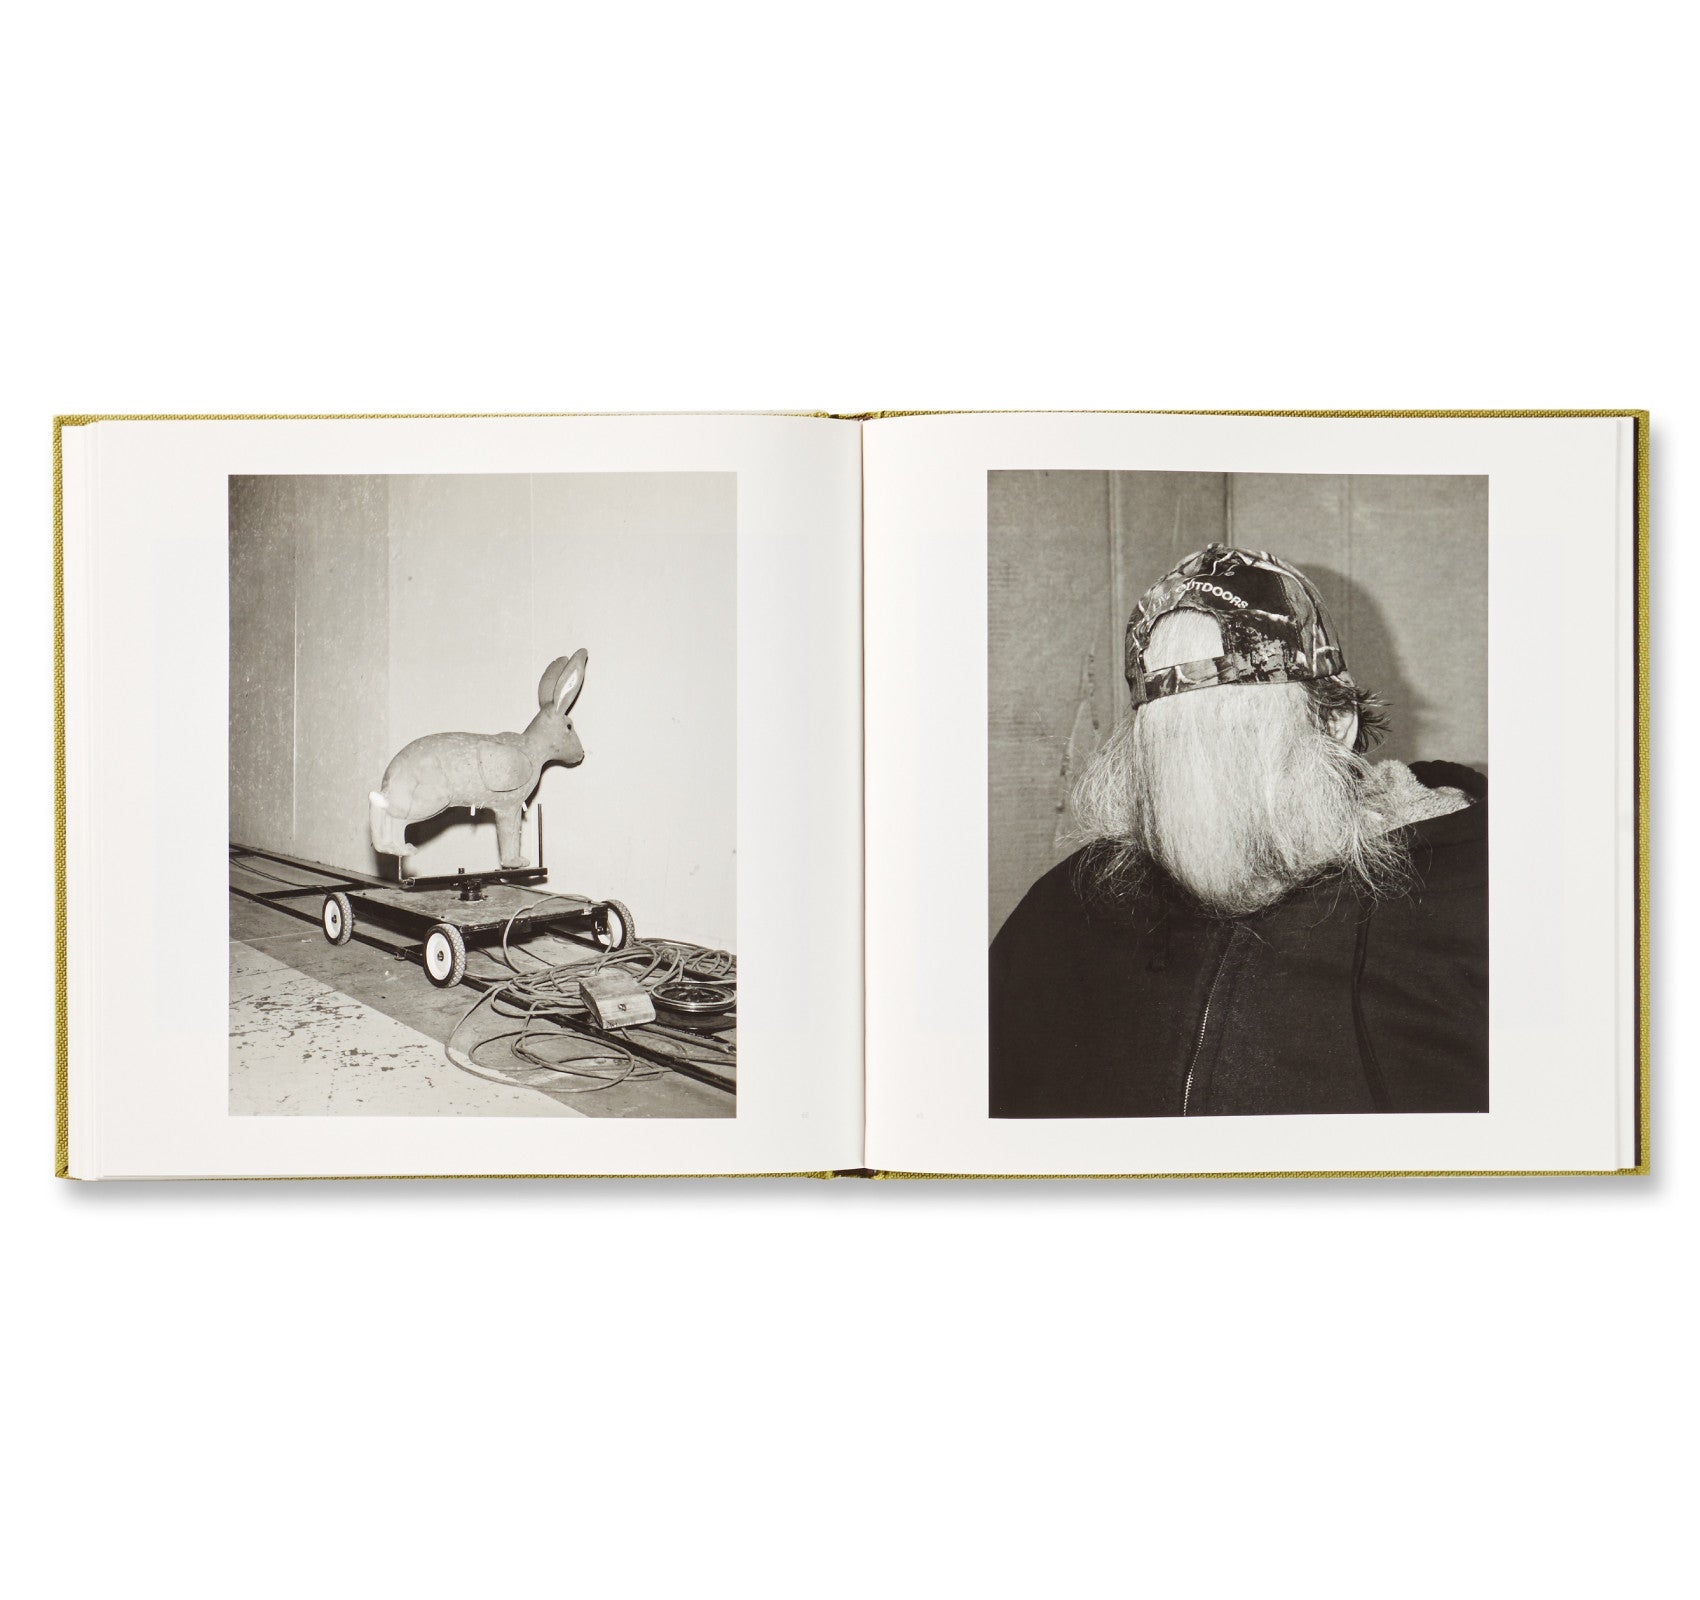 SONGBOOK by Alec Soth [FIRST EDITION, SECOND PRINTING]